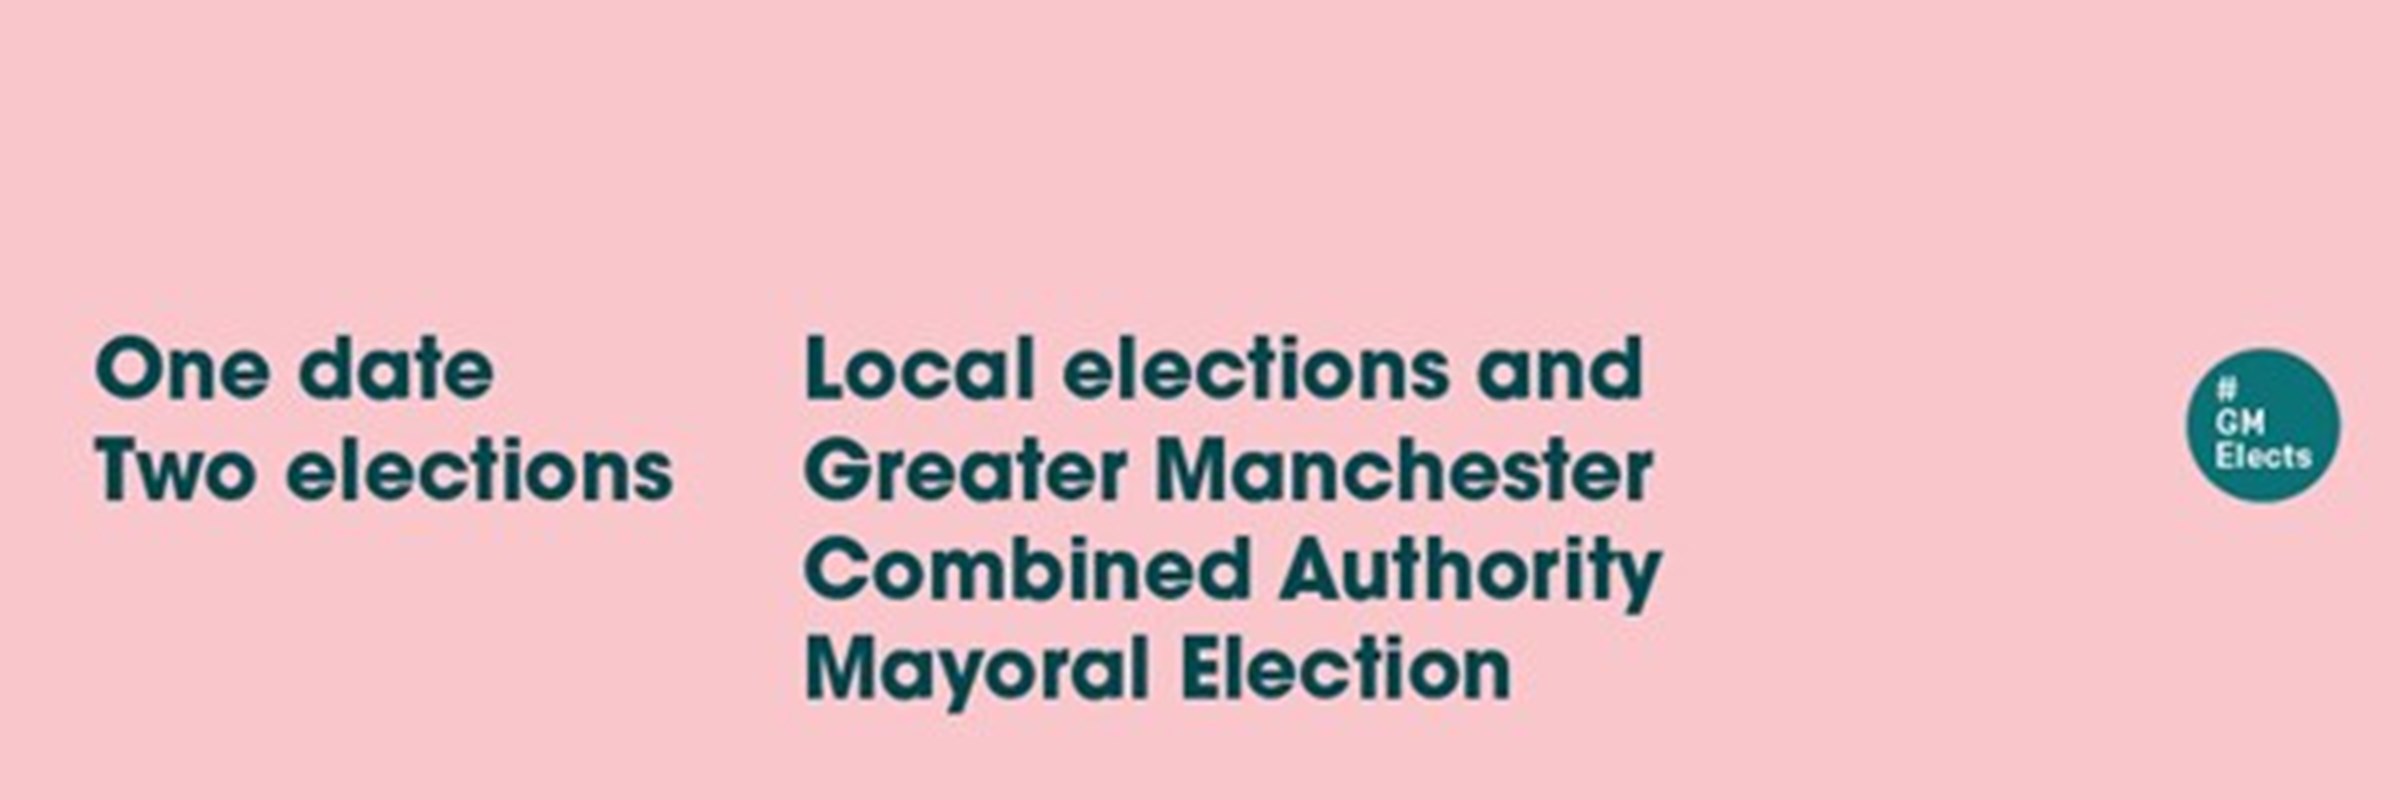 Image showing the local elections for Greater Manchester as 2 May. One date. Two elections. Local elections and Greater Manchester Combined Authority Mayoral election.